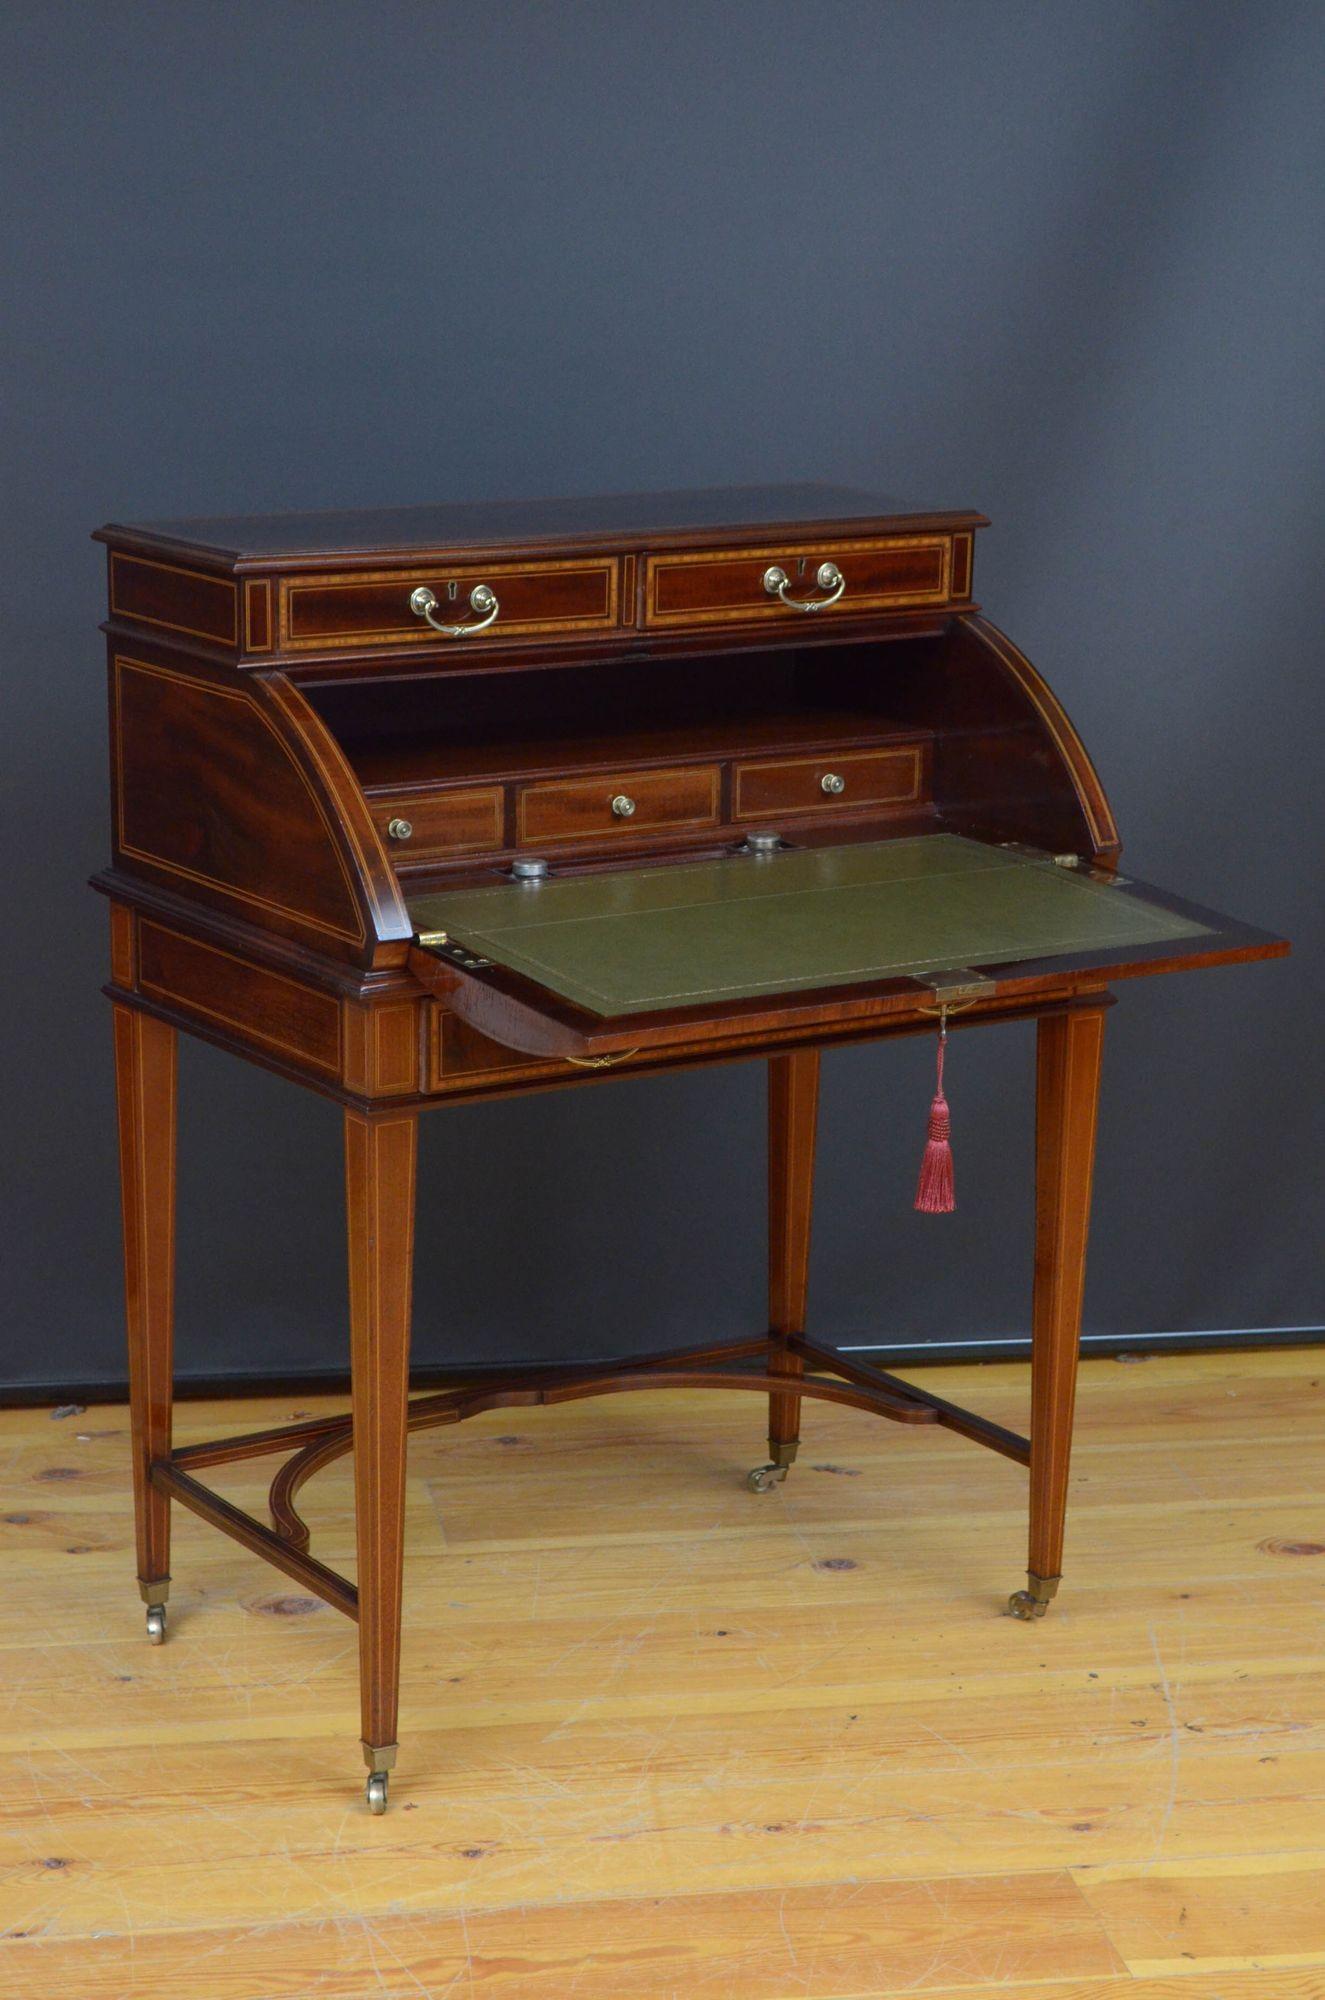 Exhibition Quality Mahogany Cylinder Bureau by Maple & Co In Good Condition For Sale In Whaley Bridge, GB